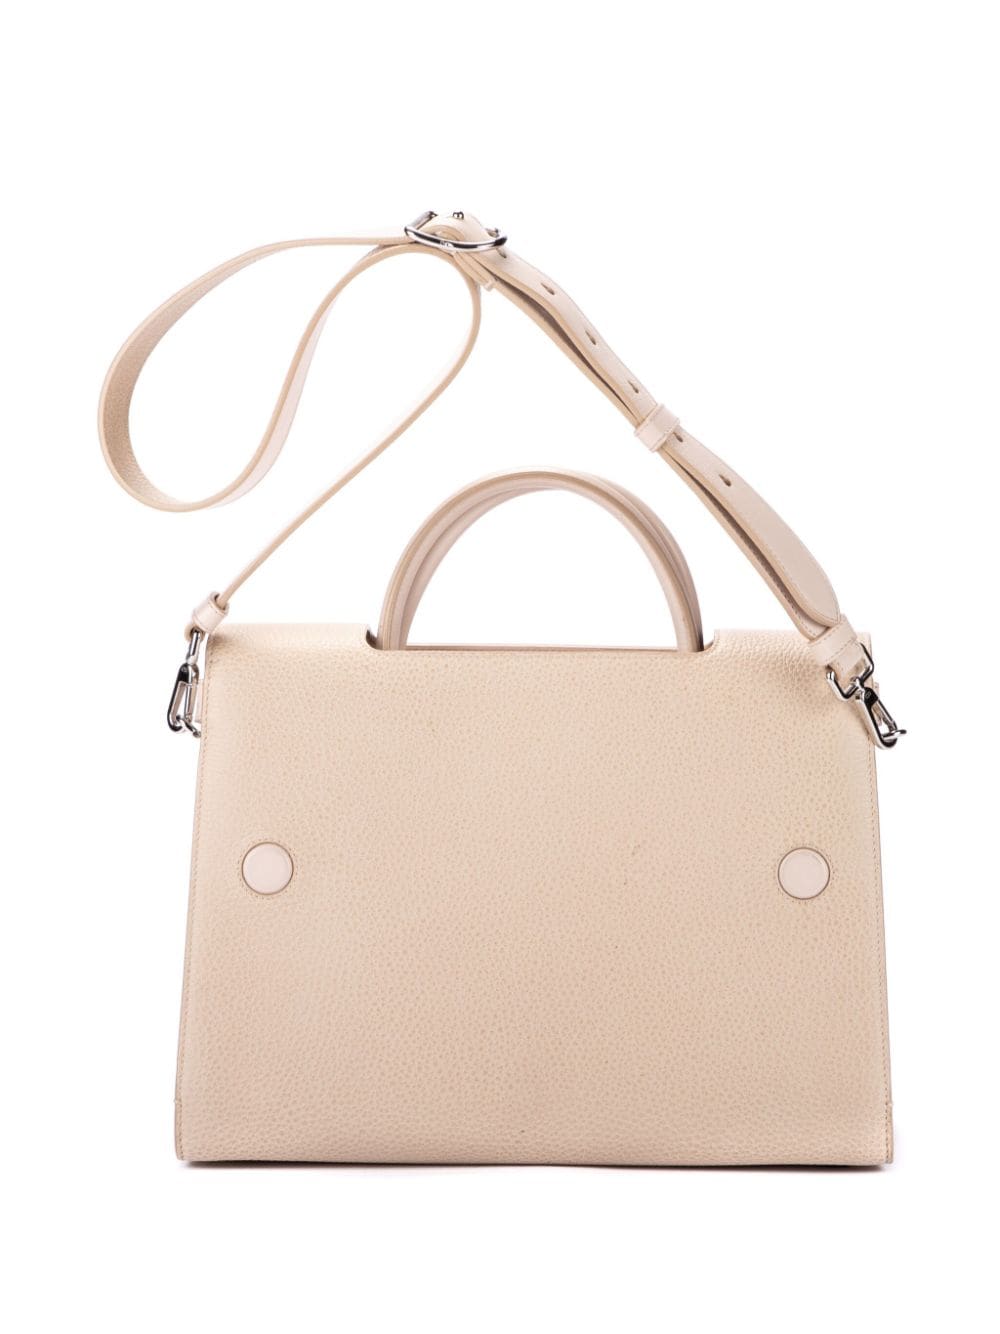 Christian Dior Pre-Owned medium Diorever two-way bag - Beige